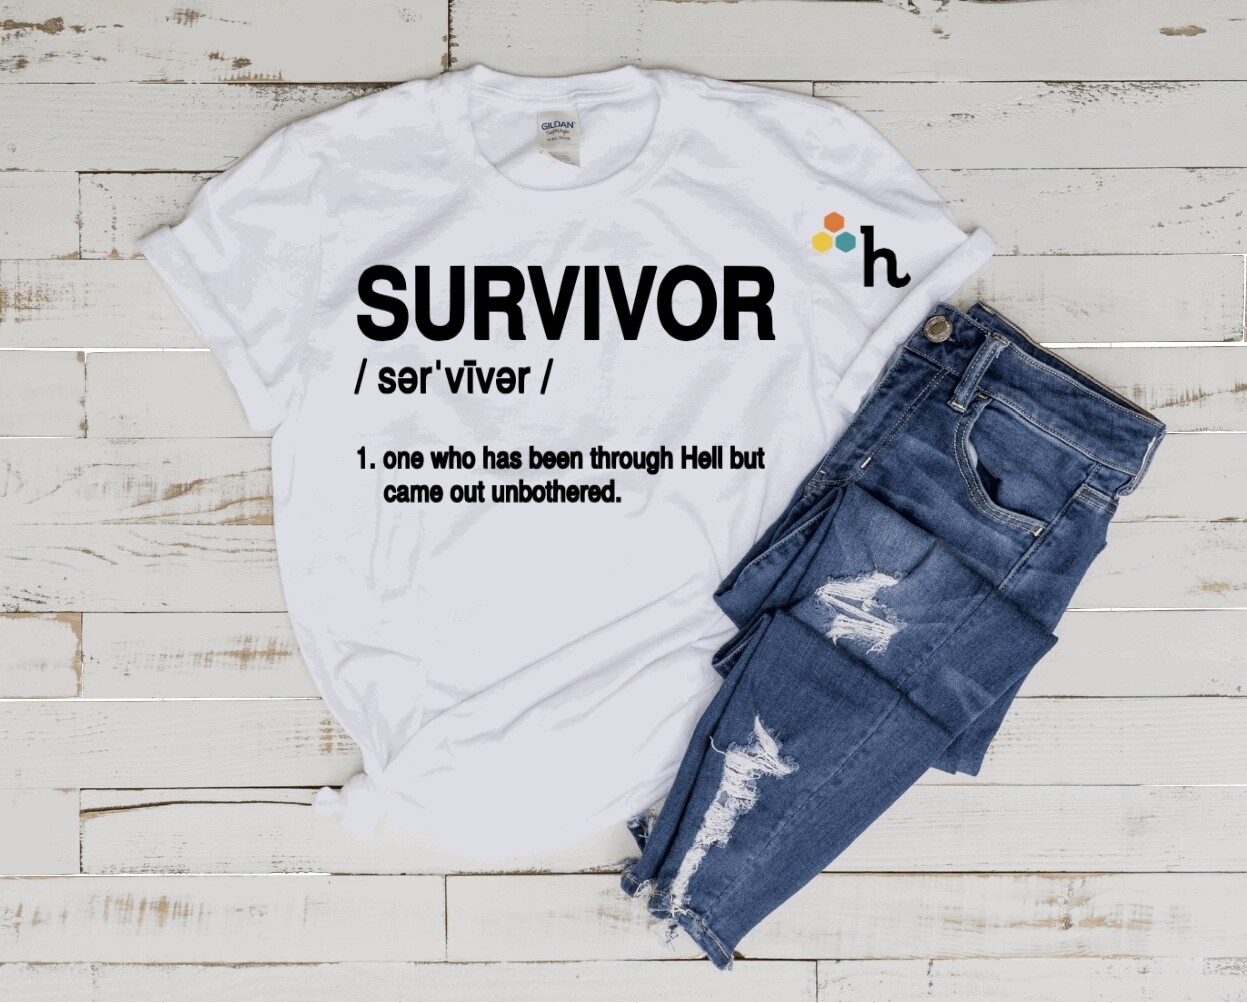 "Survivor: One Who Has Been Through Hell but Came Out Unbothered"